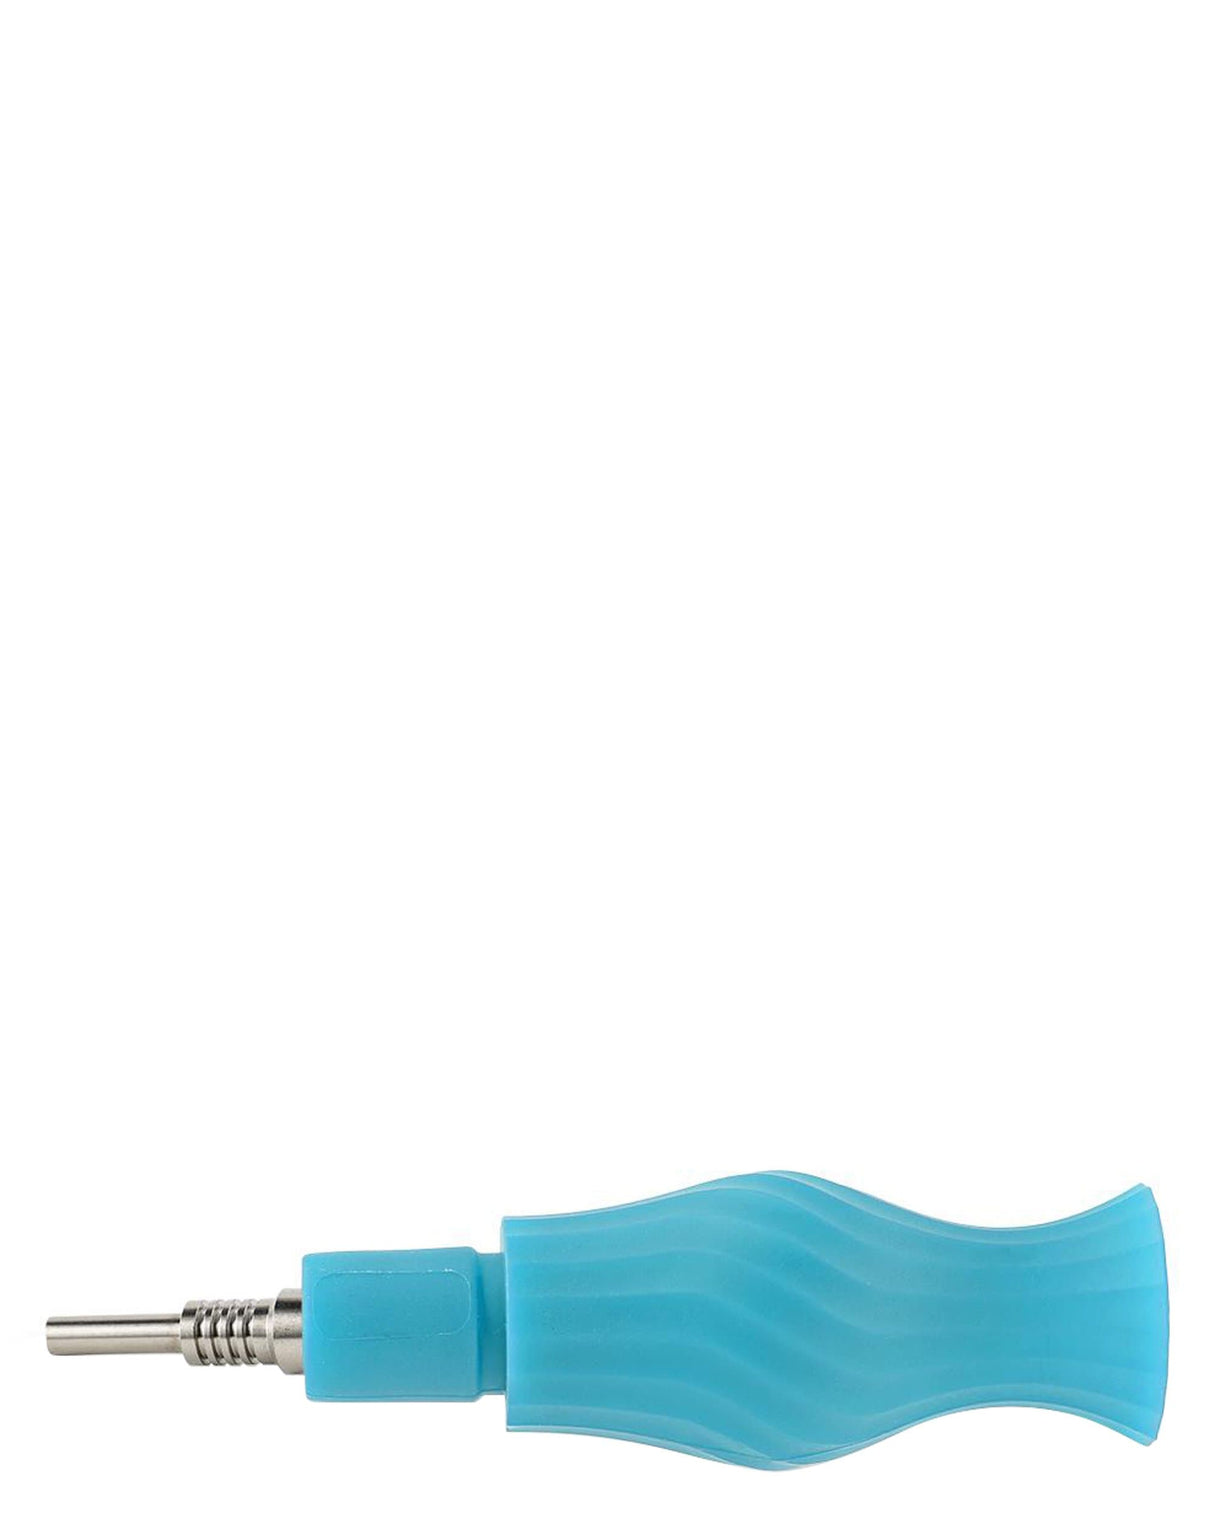 Ooze Echo 4-in-1 Silicone Bong in blue, side view, with slitted percolator and durable design